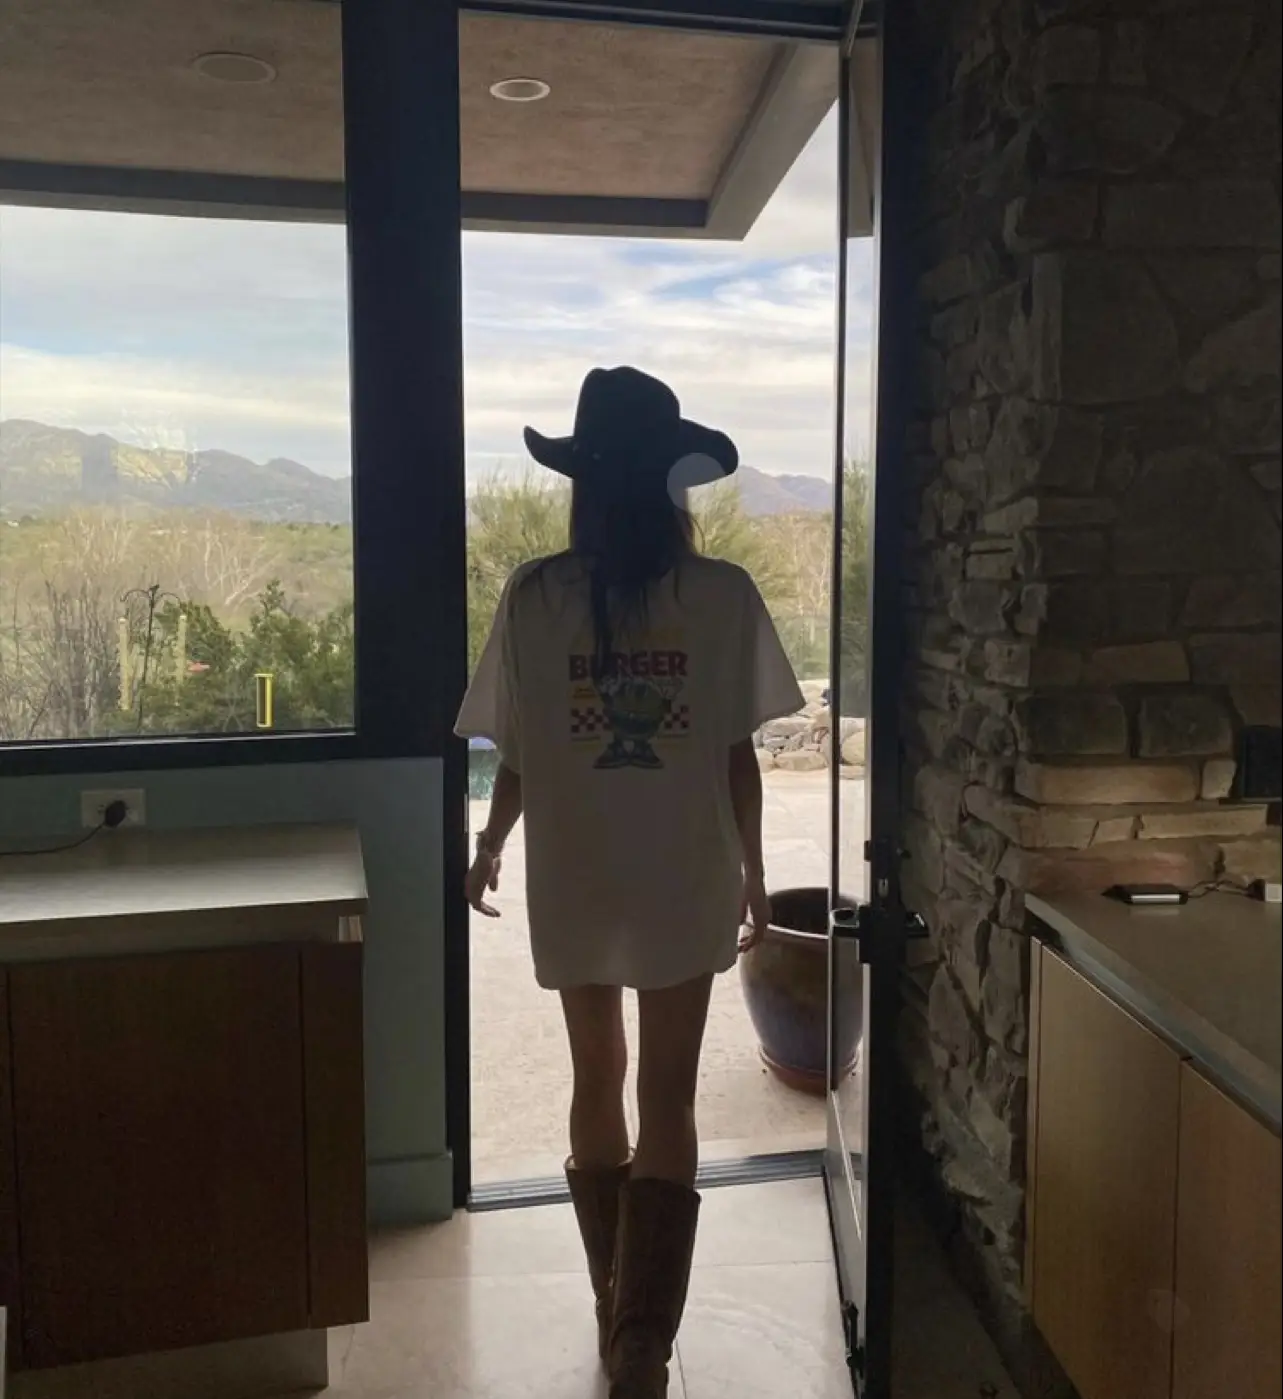  A woman wearing a white shirt and cowboy boots is standing in a kitchen.